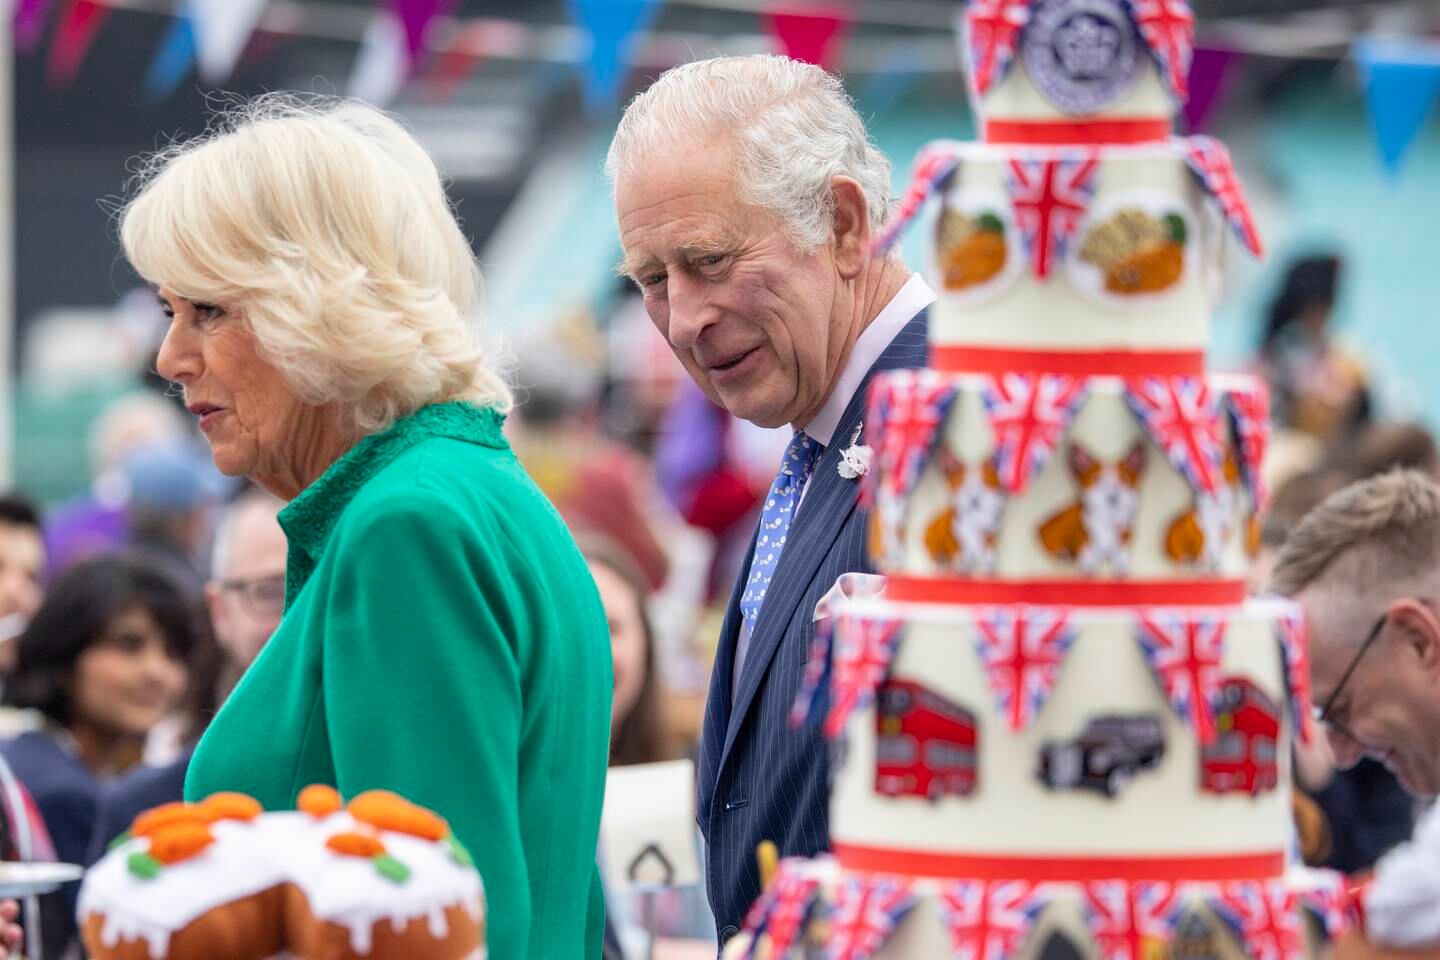 Prince Charles and Camilla Duchess of Cornwall examine jubilee cakes at the Oval Kennington cricket ground. Street and garden parties across the UK have celebratd Queen Elizabeth II's platinum jubilee.  EPA 